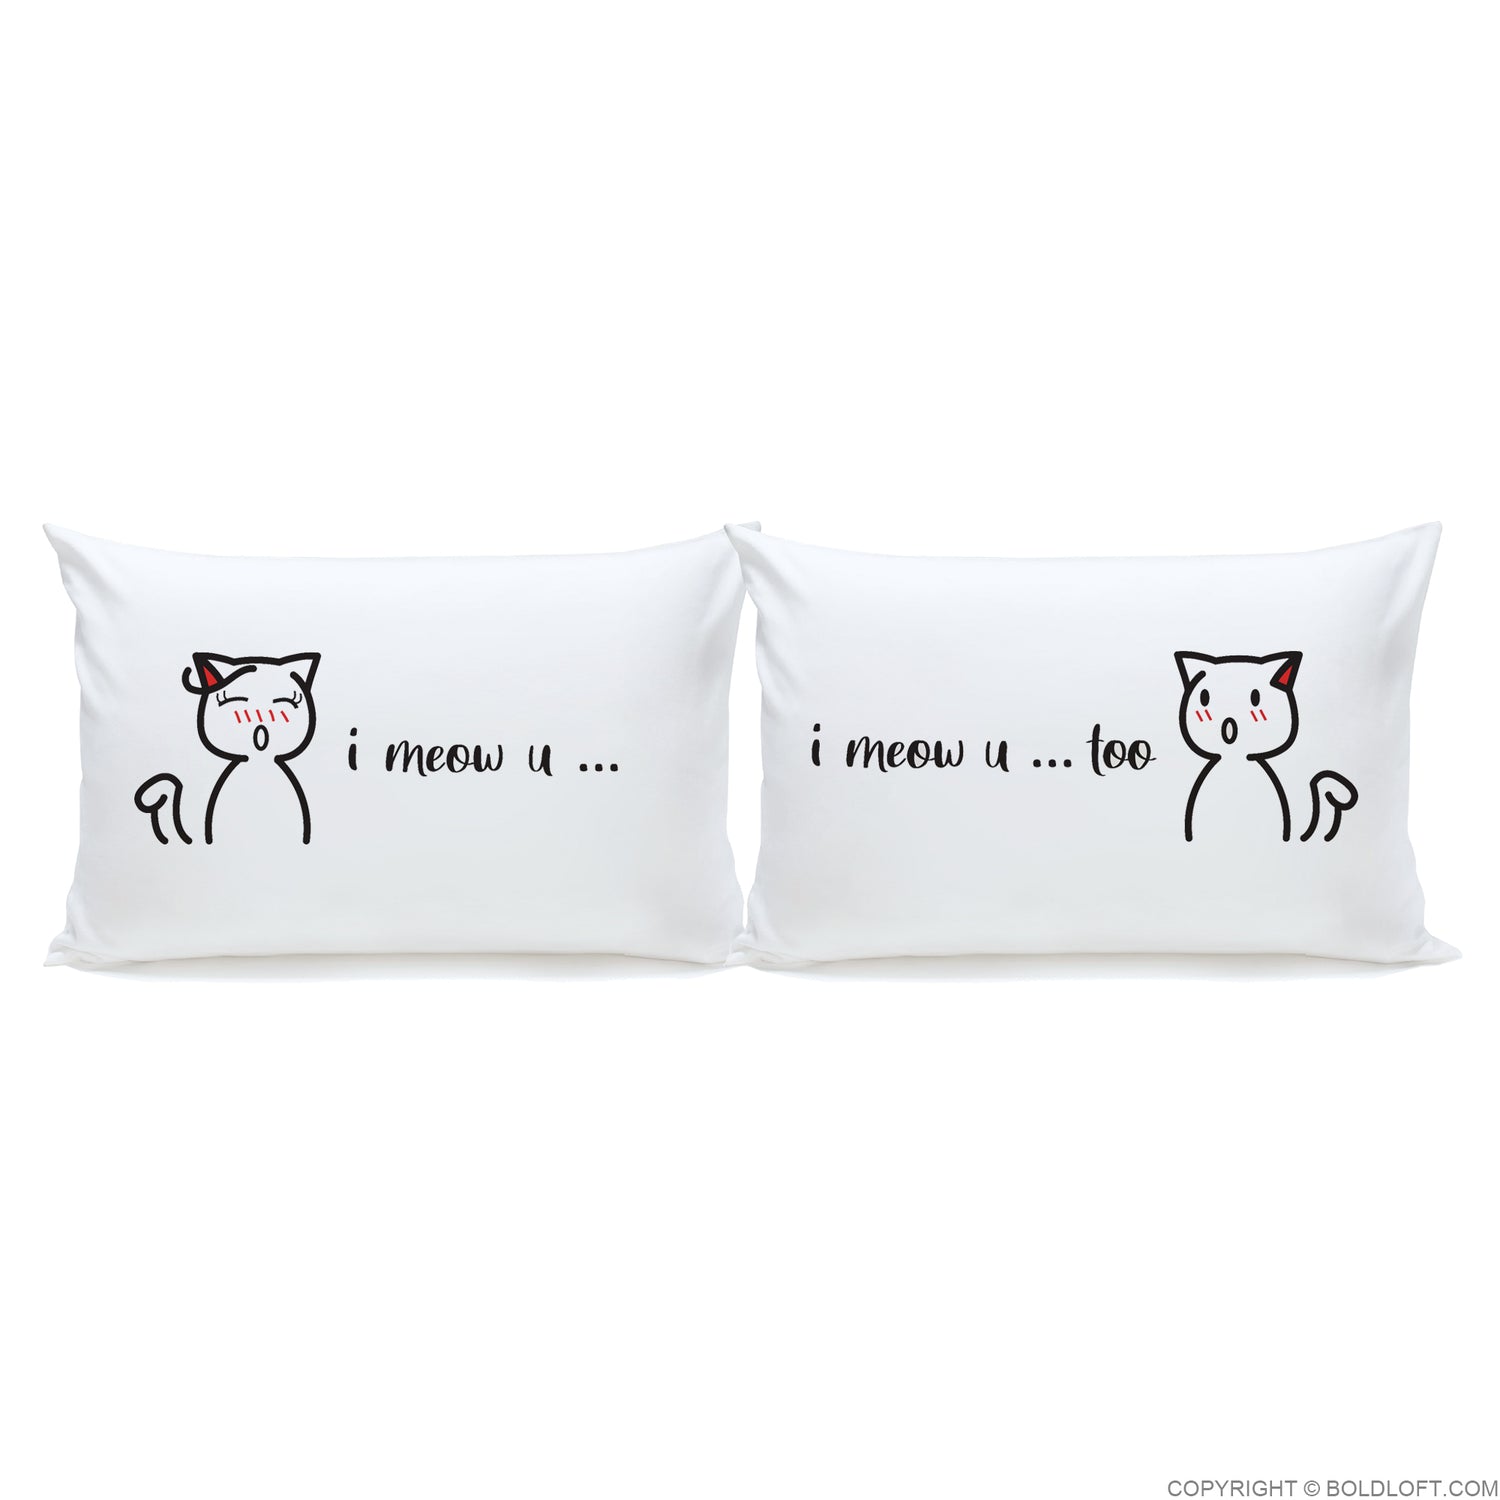 boldloft i meow you cat pillowcases for couples cat themed gift for cat lovers